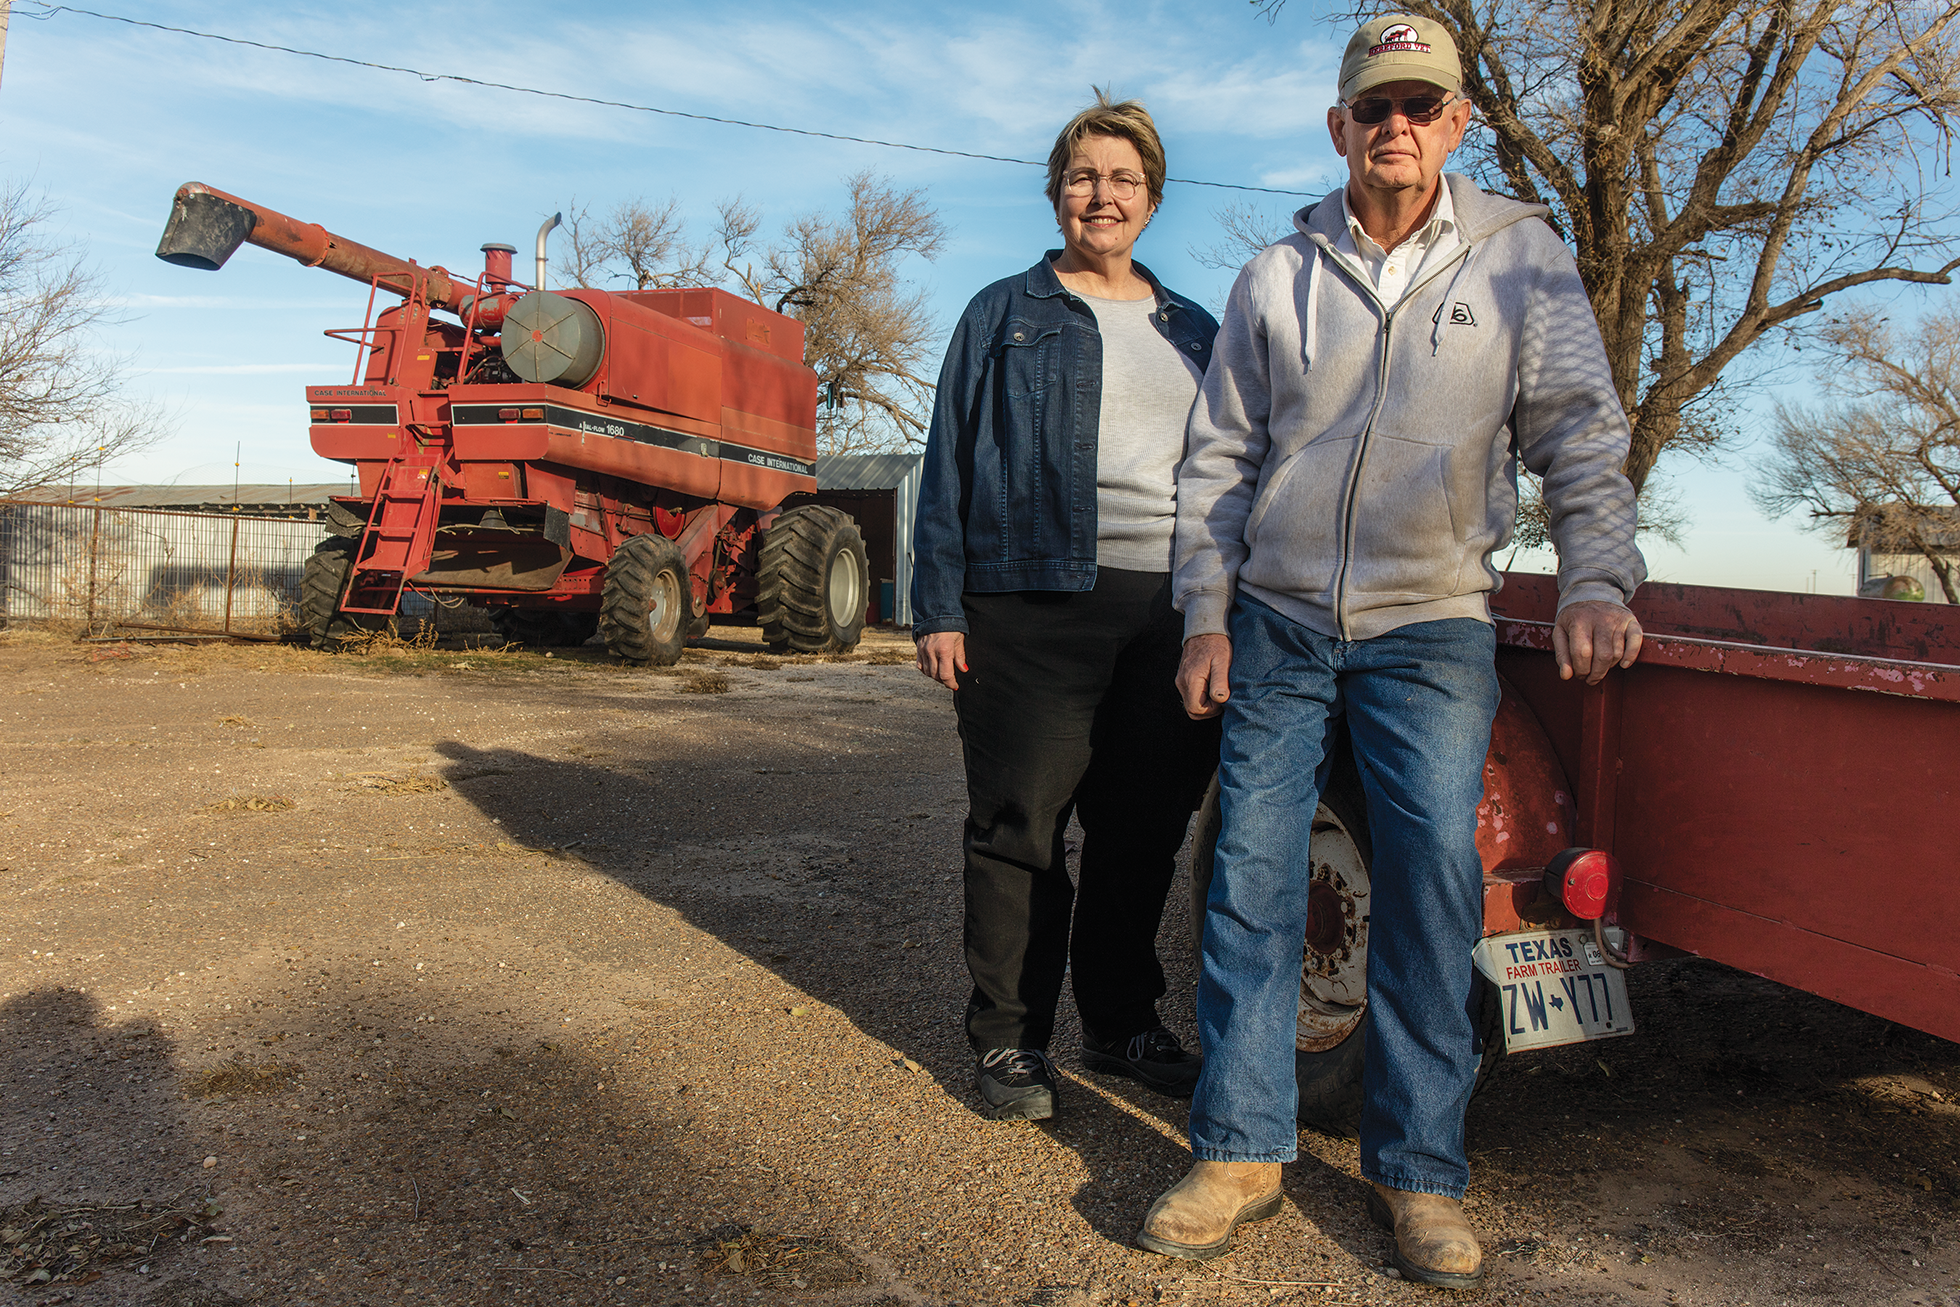 Jaime and Lawrence Brorman own a farm adjacent to Southwest Feedyard. They say their home has been inundated with dust from that and other nearby feedlots, exacerbating Jaime's asthma.